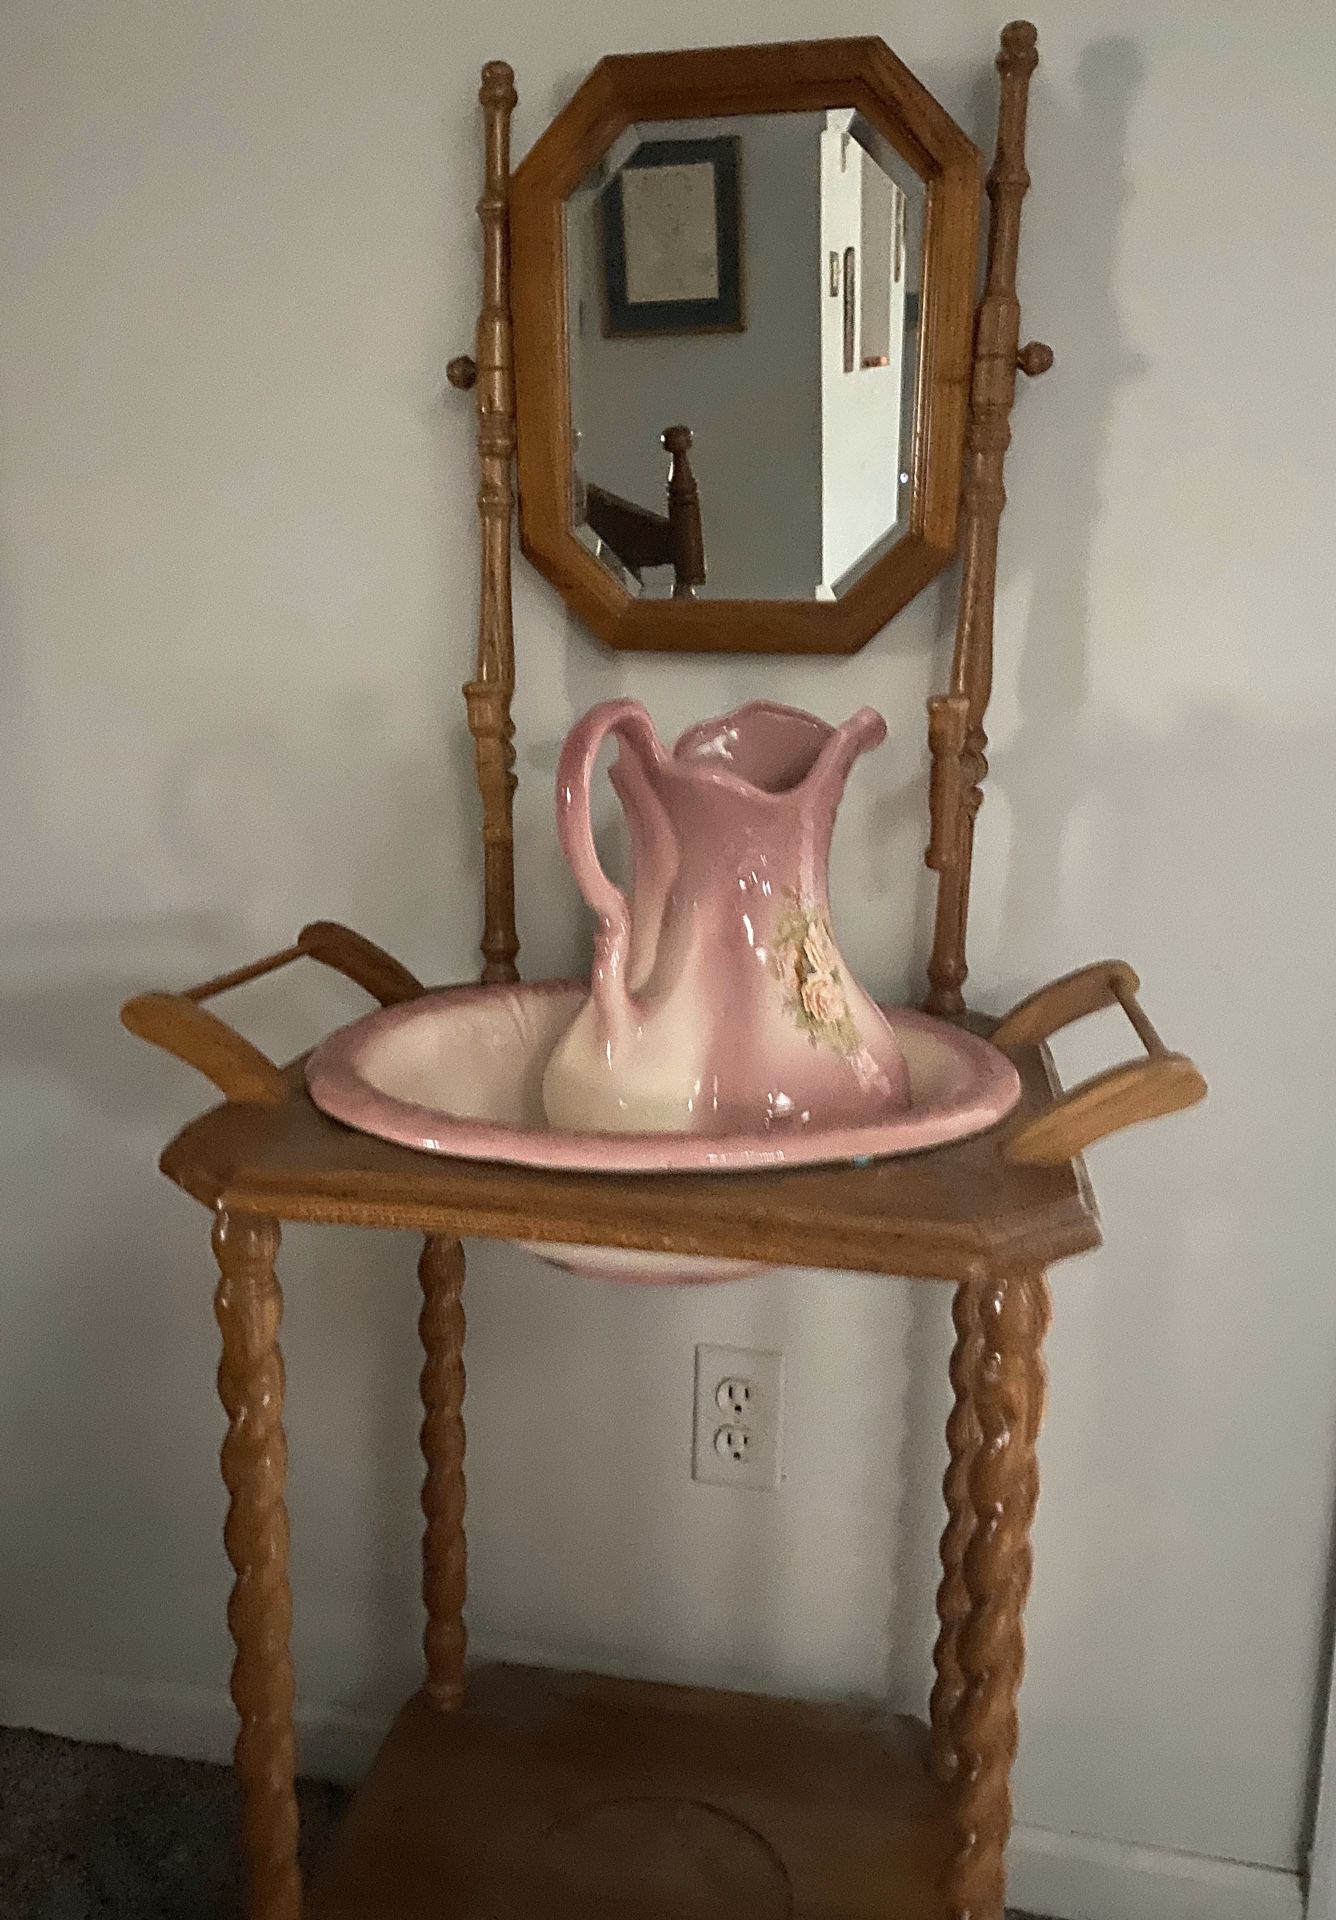 Old fashioned wash bowl and stand